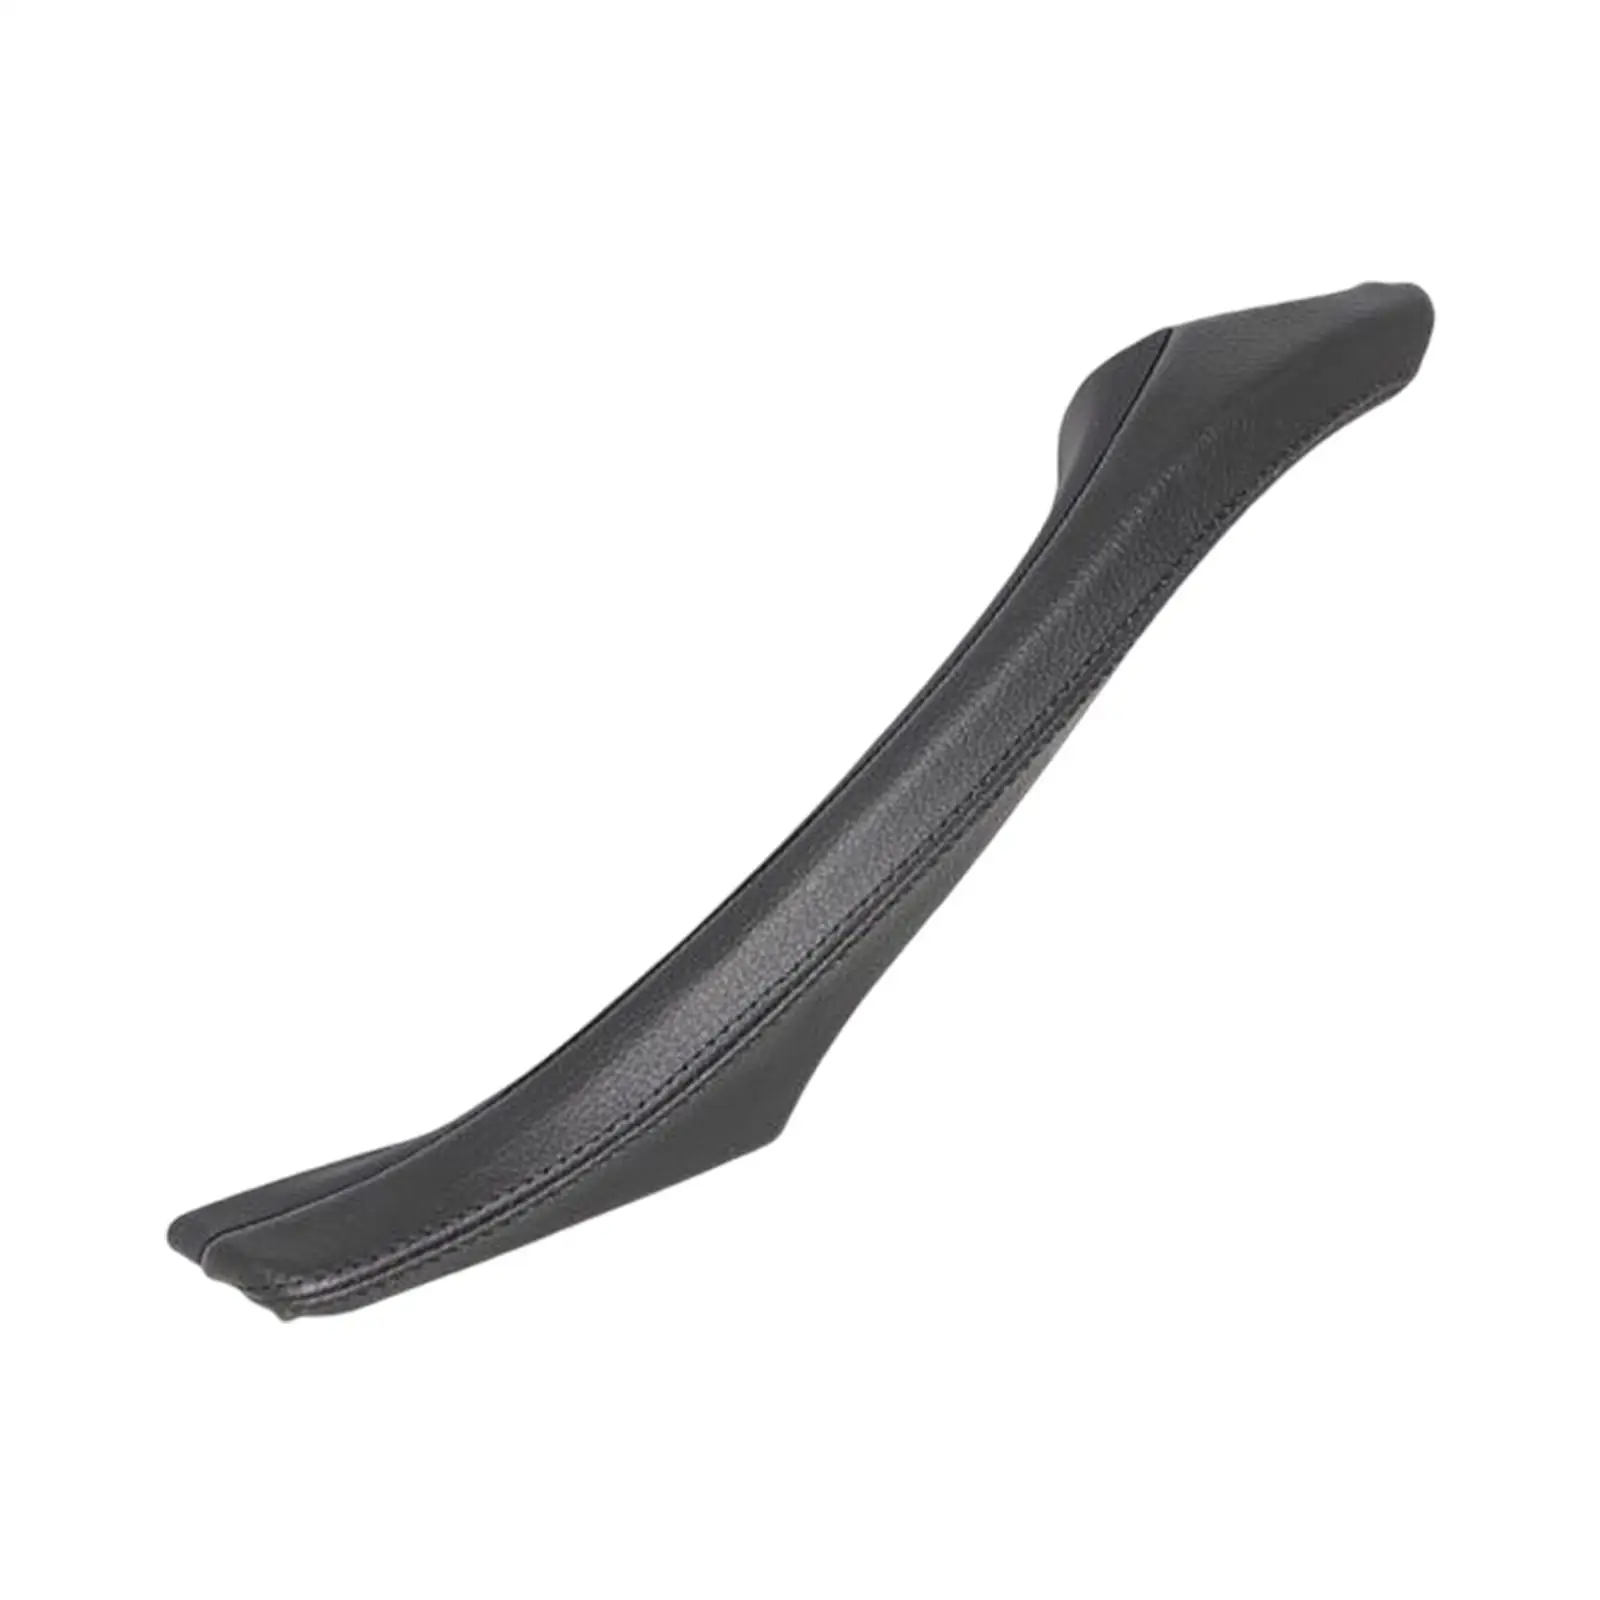 Vehicle Interior Door Pull Handle Assembly 51417225854 for BMW 5 Series F10 F11 F18 Accessories Easy Installation